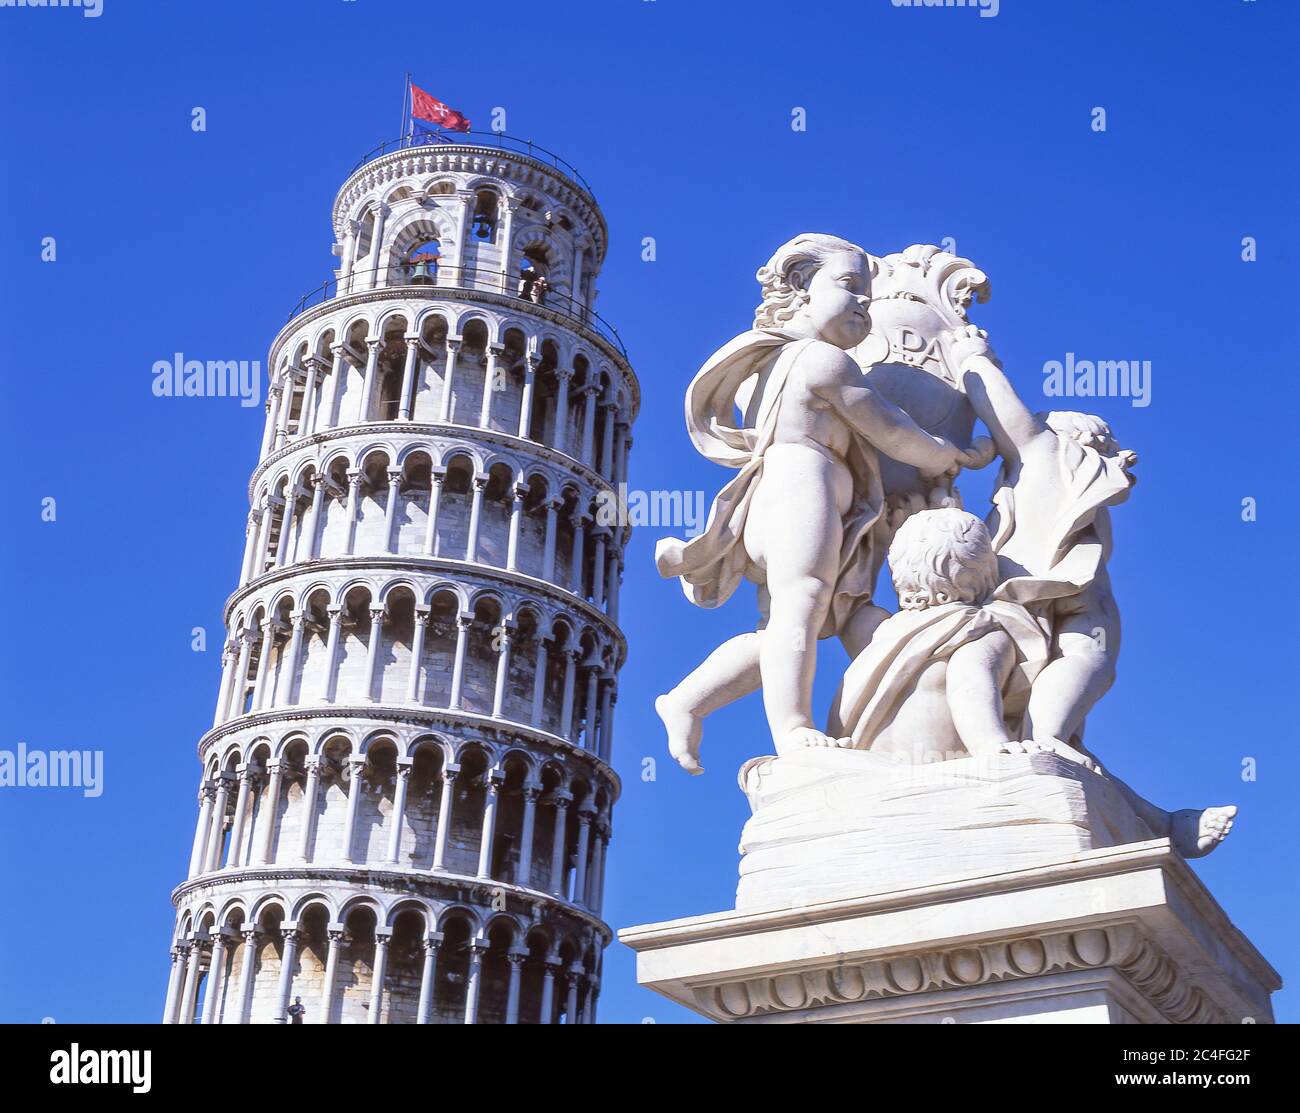 The Leaning Tower (Torre pendente di Pisa), Piazza dei Miracoli, Pisa, Tuscany Region, Italy Stock Photo